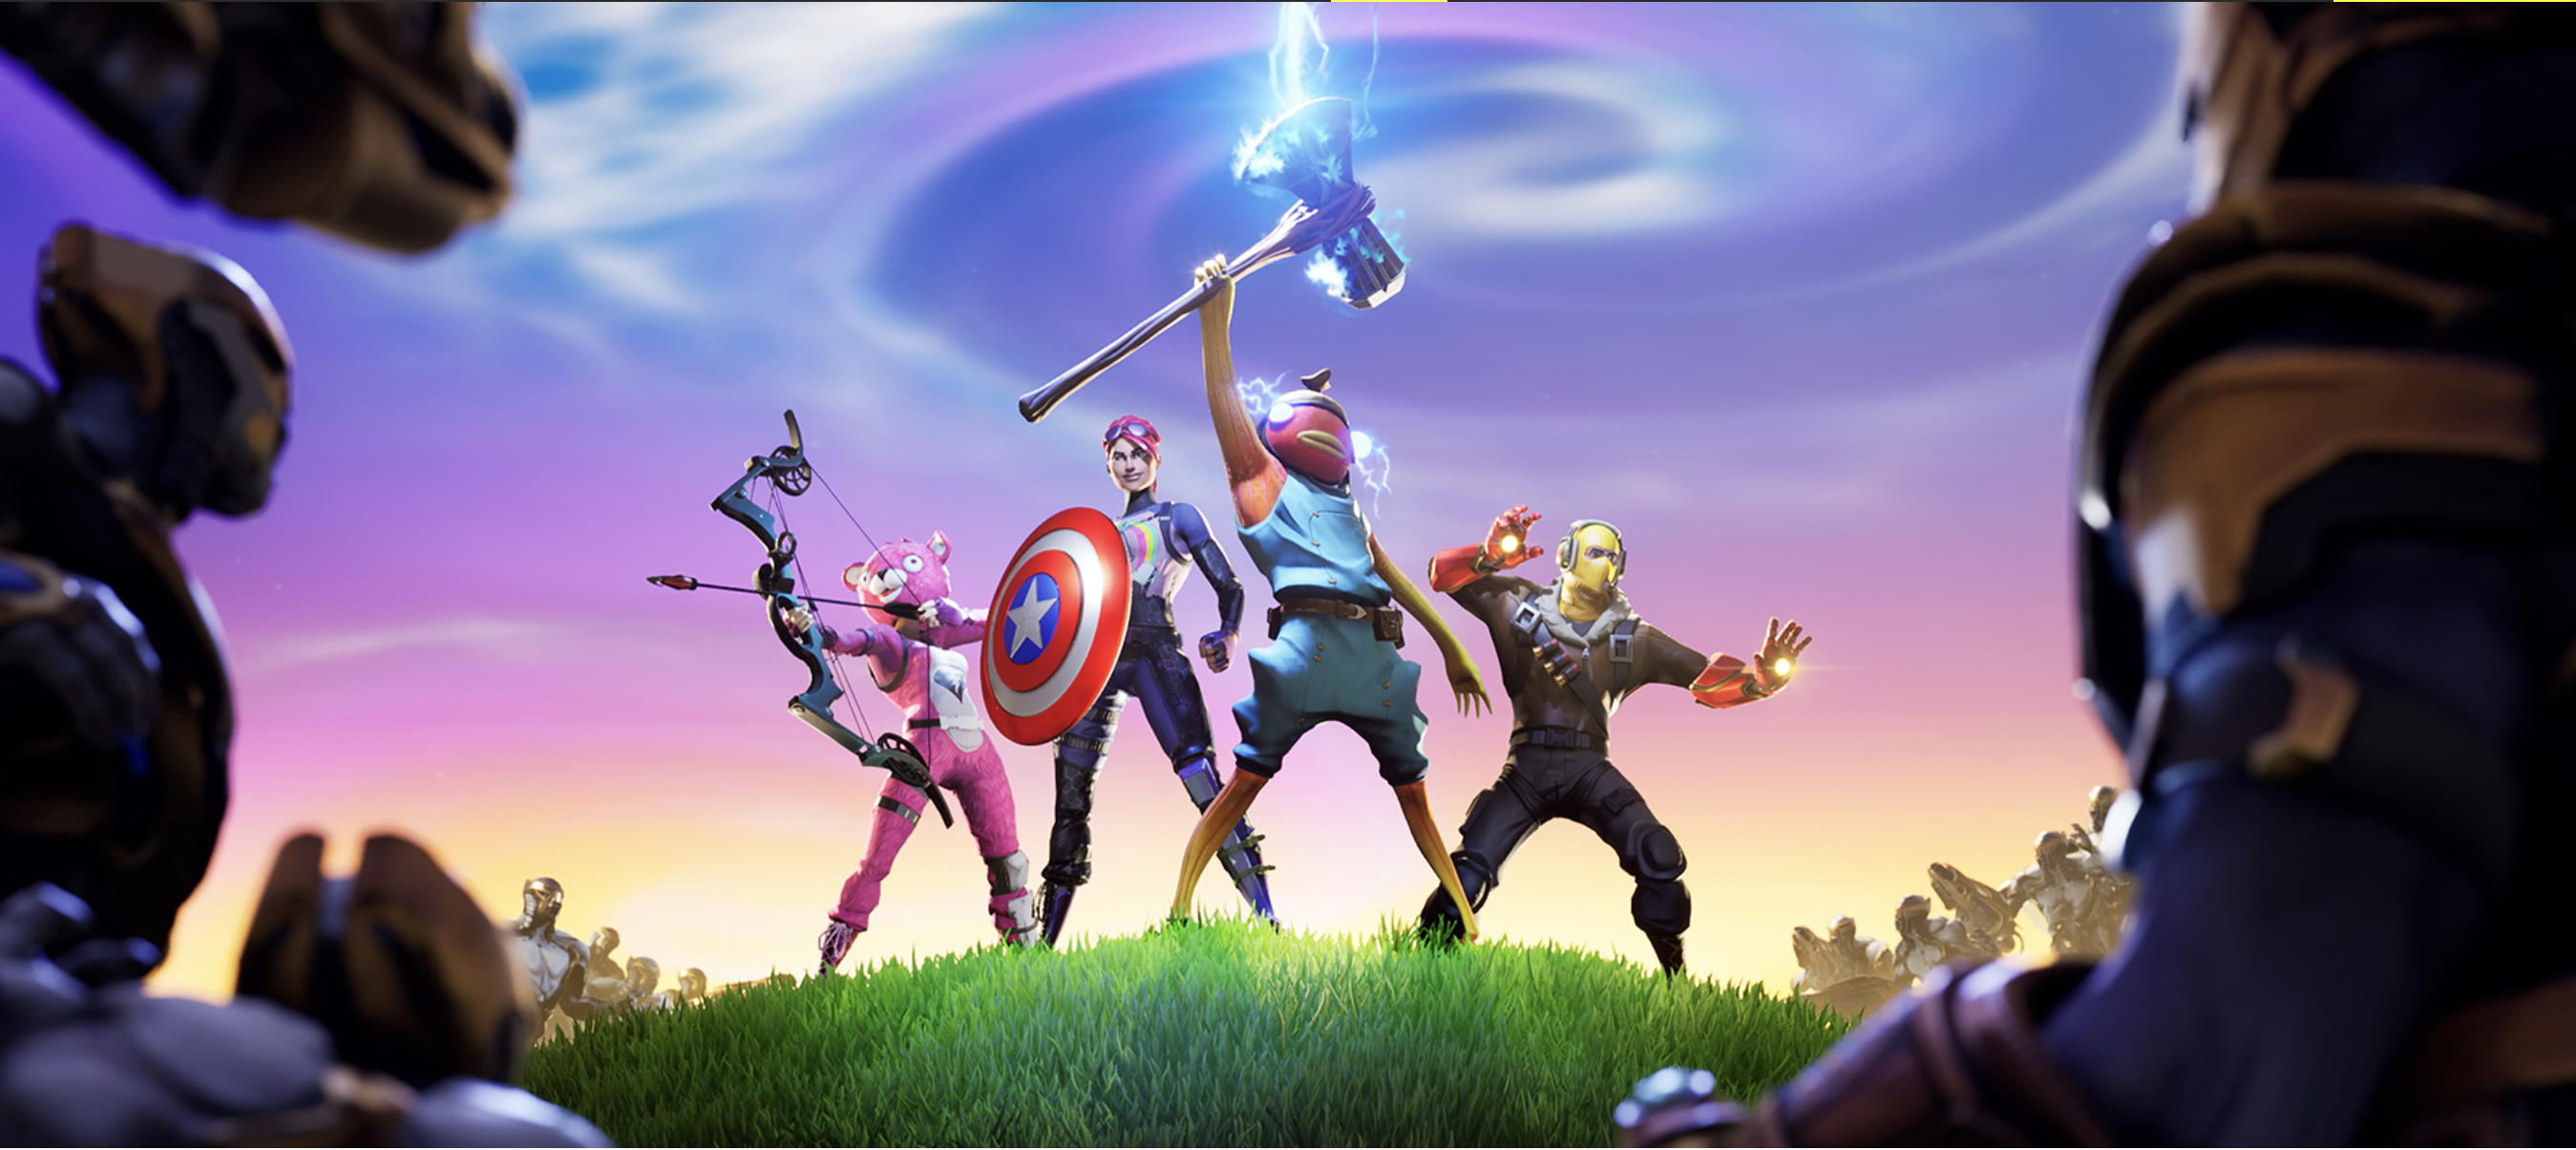 Fortnite Reveals New Avengers Collaboration With Thanos Avenger - get your avengers endgame fix early with the all new fortnite collaboration